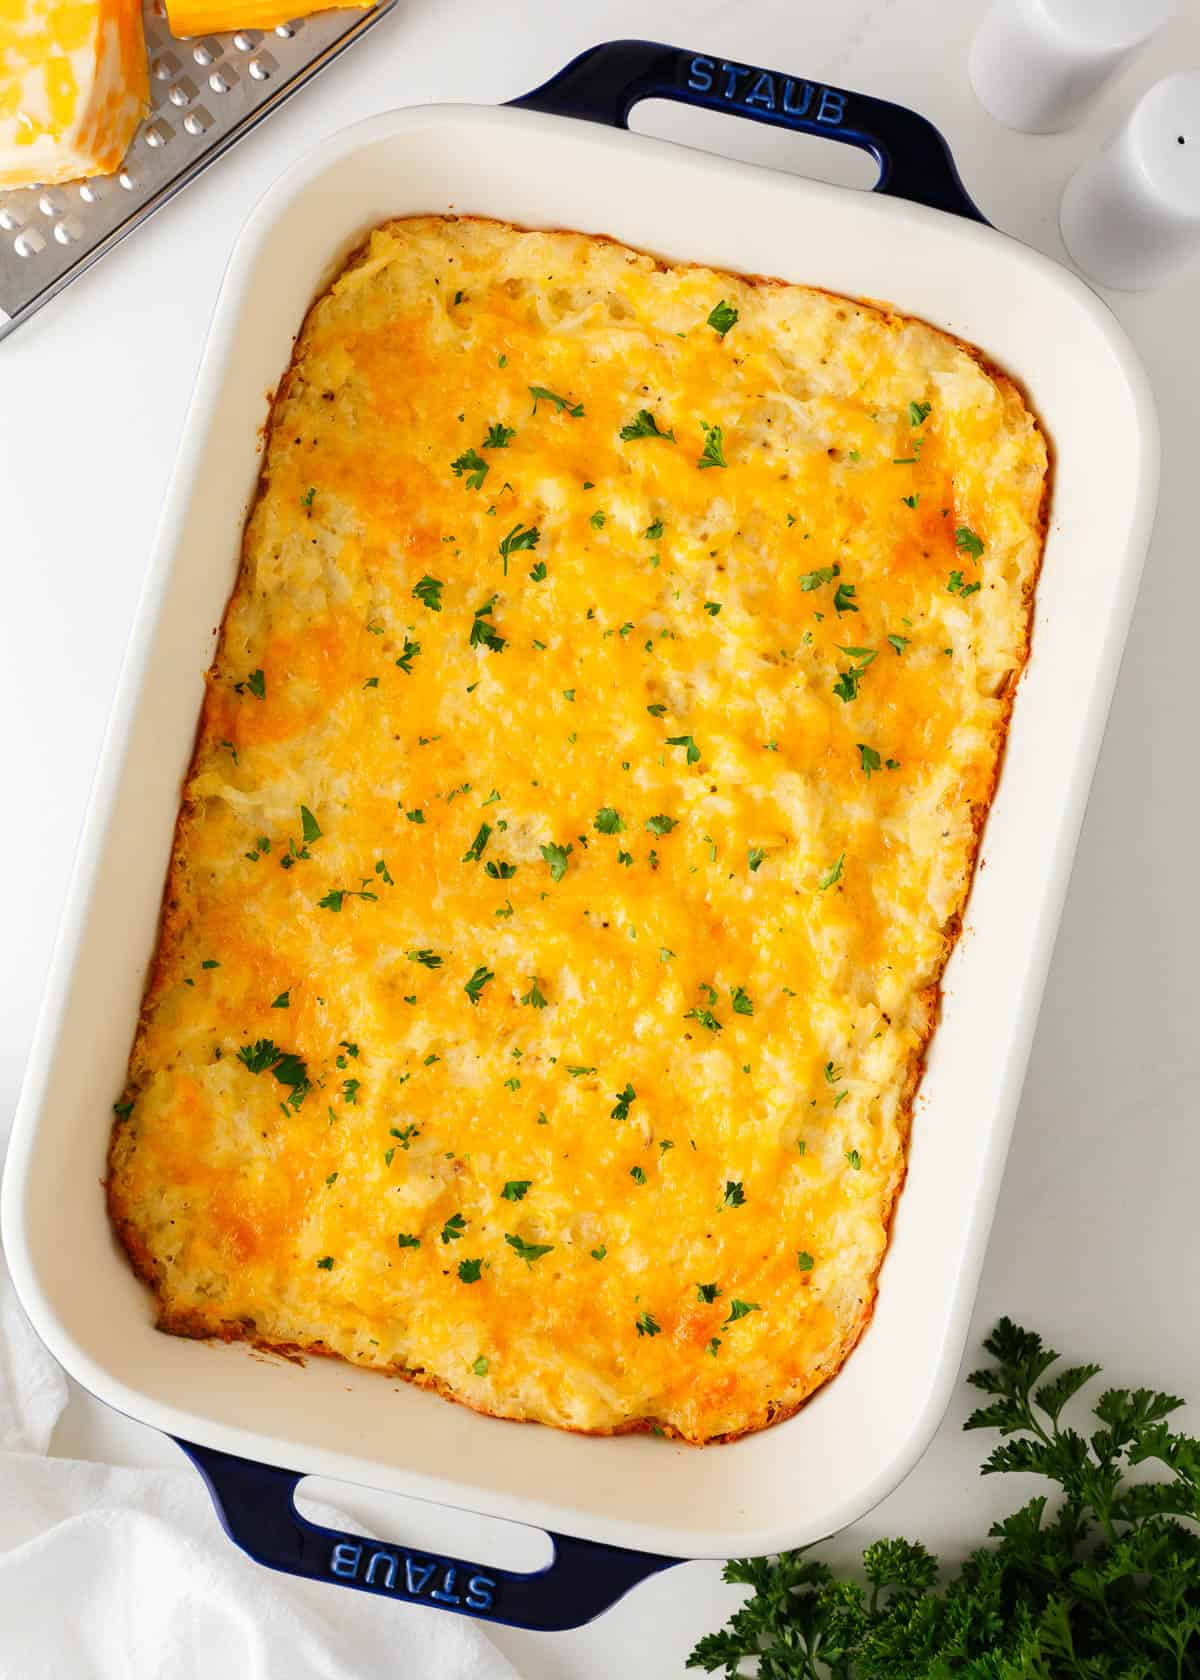 Hashbrown casserole cooked in a baking dish.